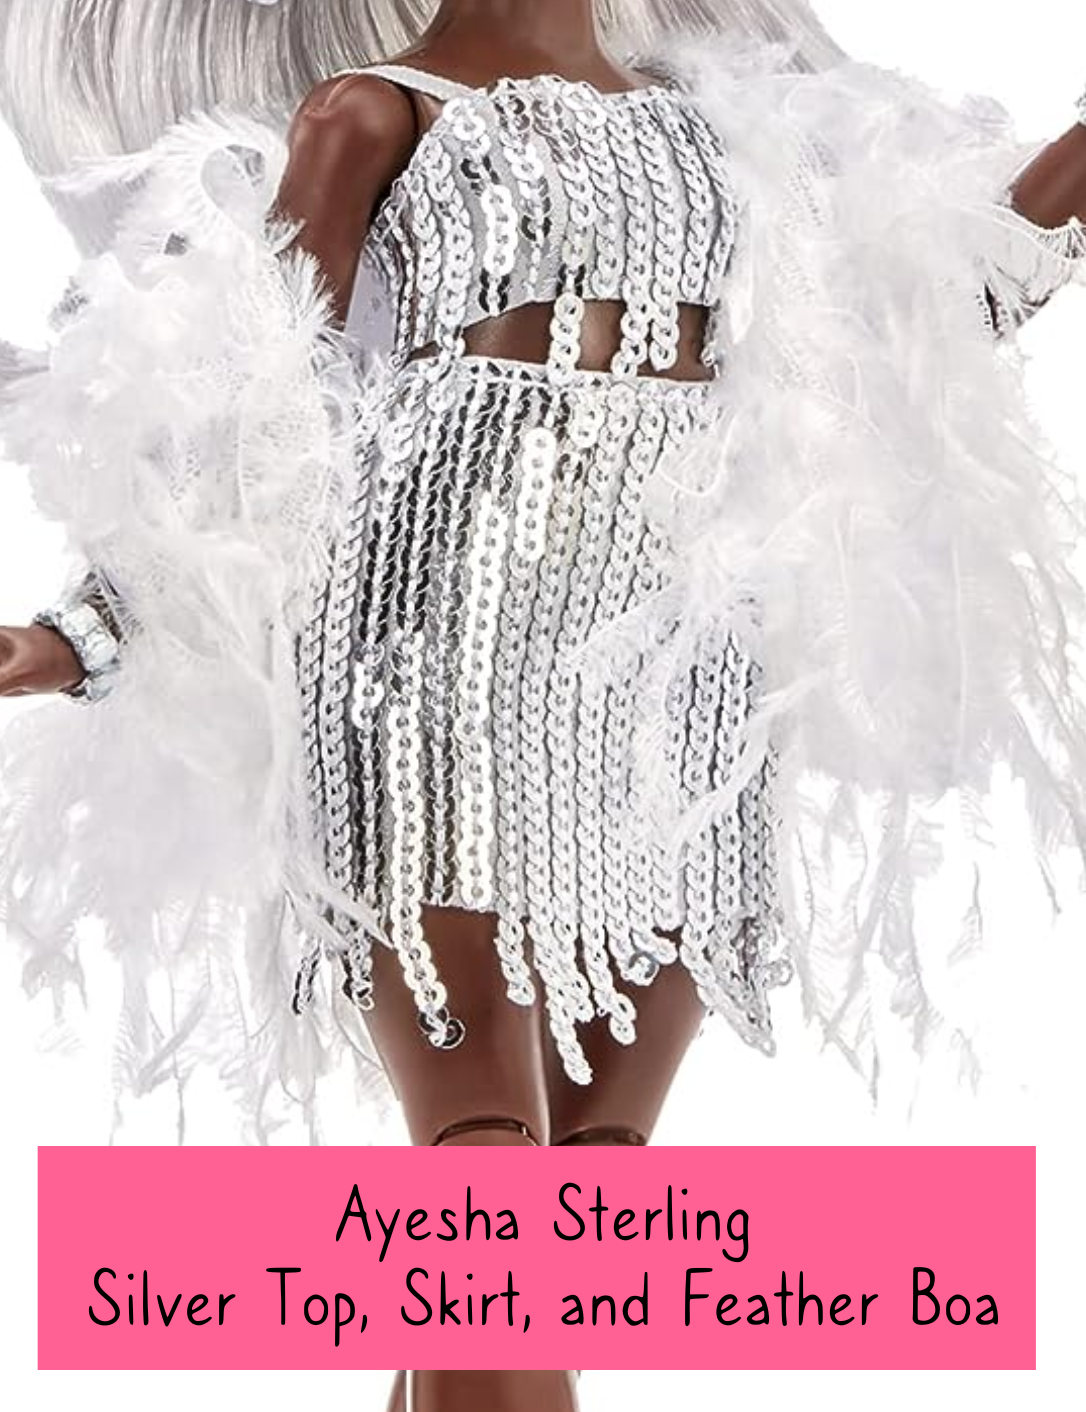 Rainbow High Rainbow Vision Diva Ayesha Sterling Outfit